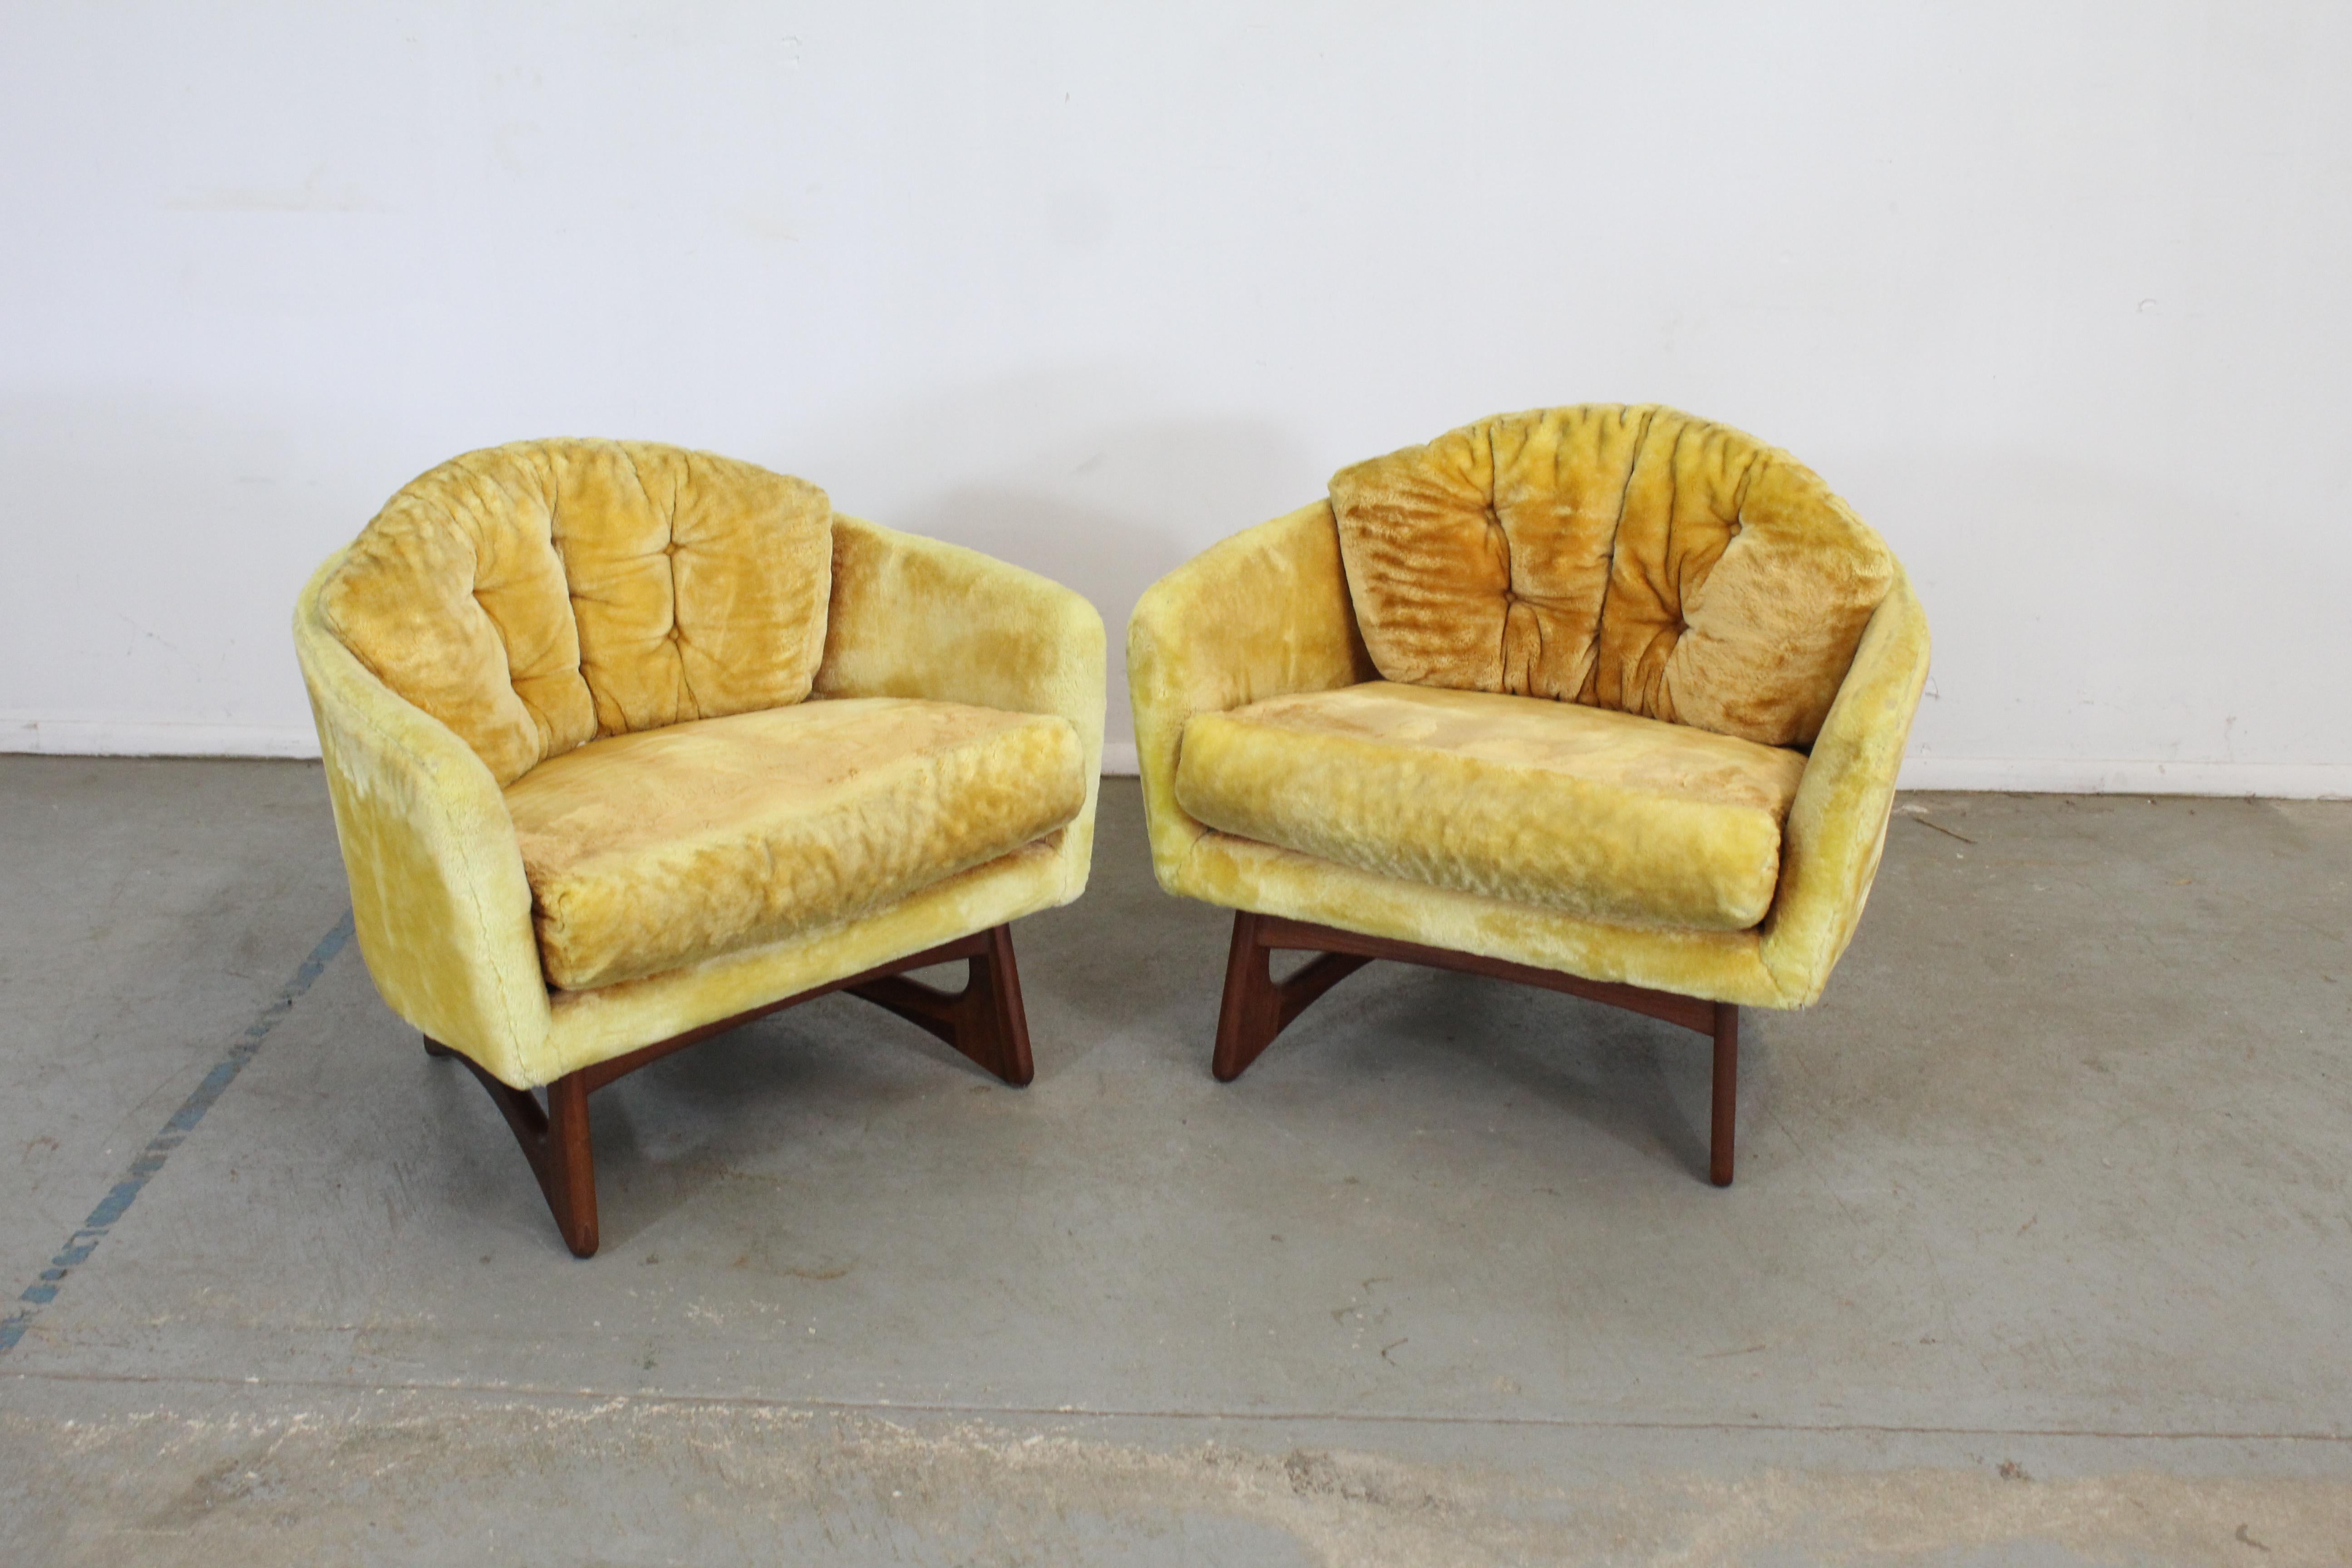 Pair of Mid-Century Modern barrel back club chairs by Adrian Pearsall for Craft Associates

Offered is a pair of Mid-Century Modern barrel back club chairs by Adrian Pearsall for Craft Associates. These chairs have round backs. They are designed